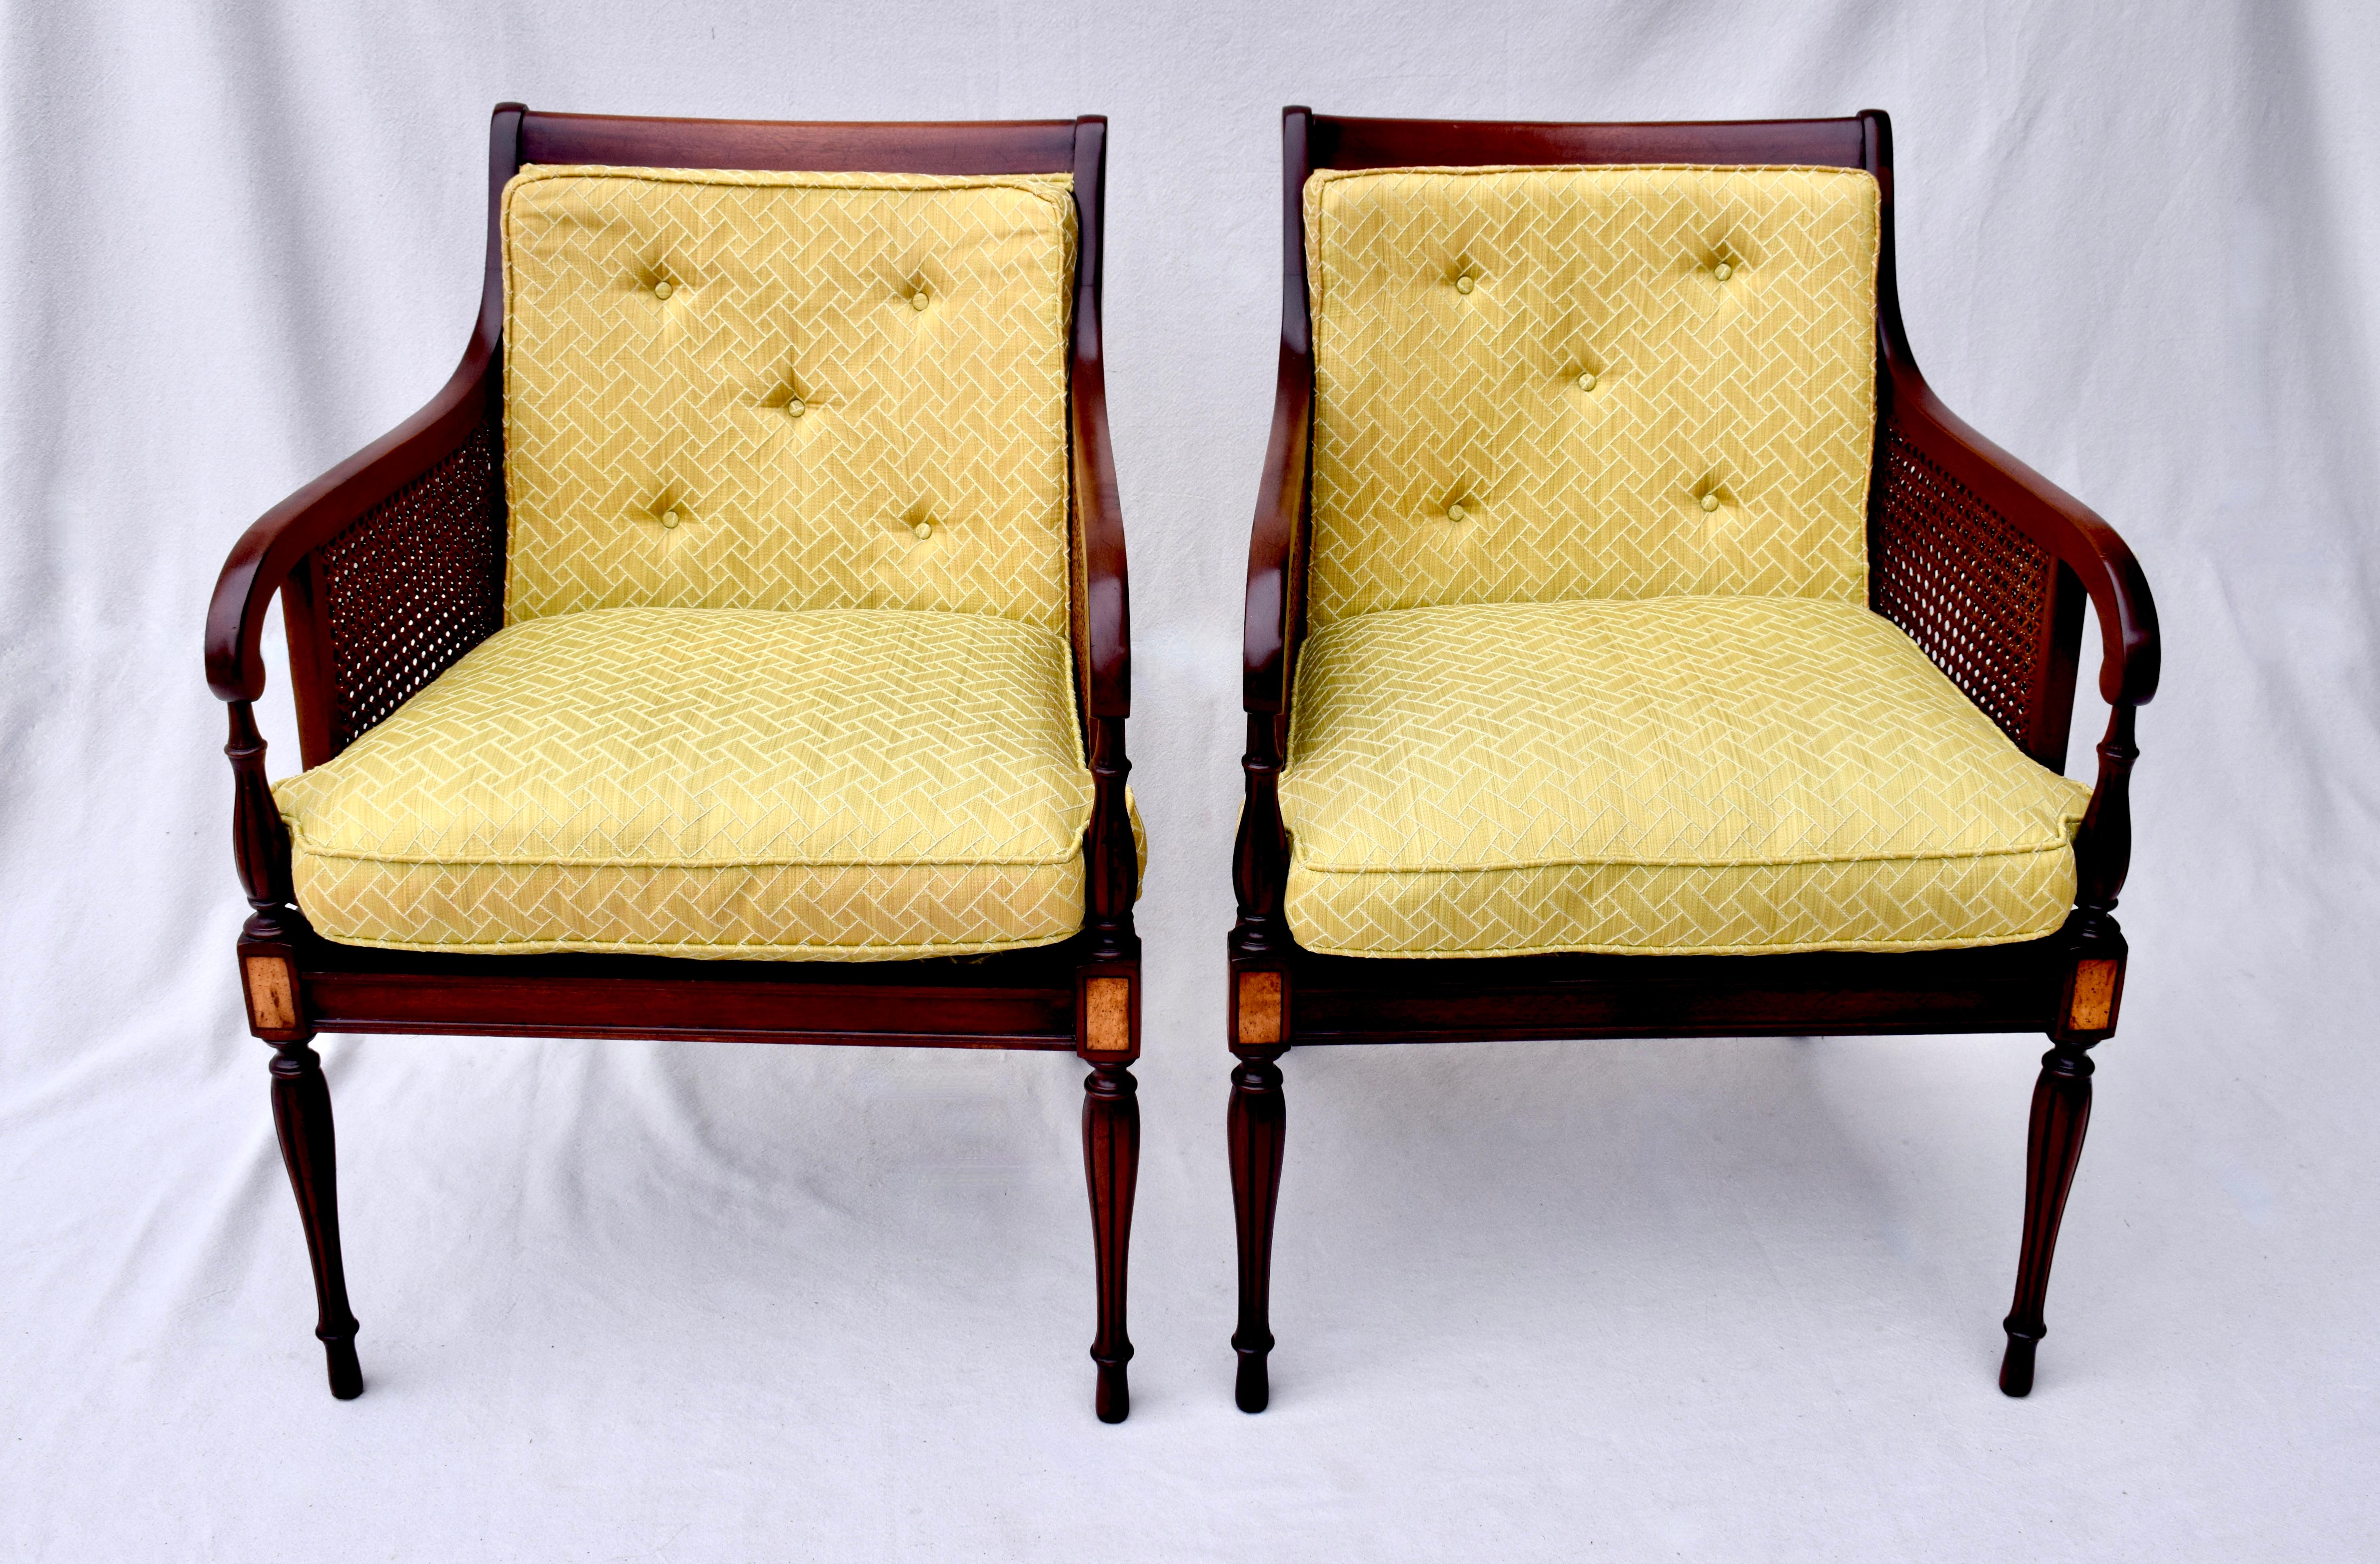 A pair of double caned Mahogany and Satinwood club, lounge or occasional chairs by Hickory Chair with original Scalamandre trellis silk upholstery having new seat inserts with goose down casings. In exceptionally well maintained vintage condition